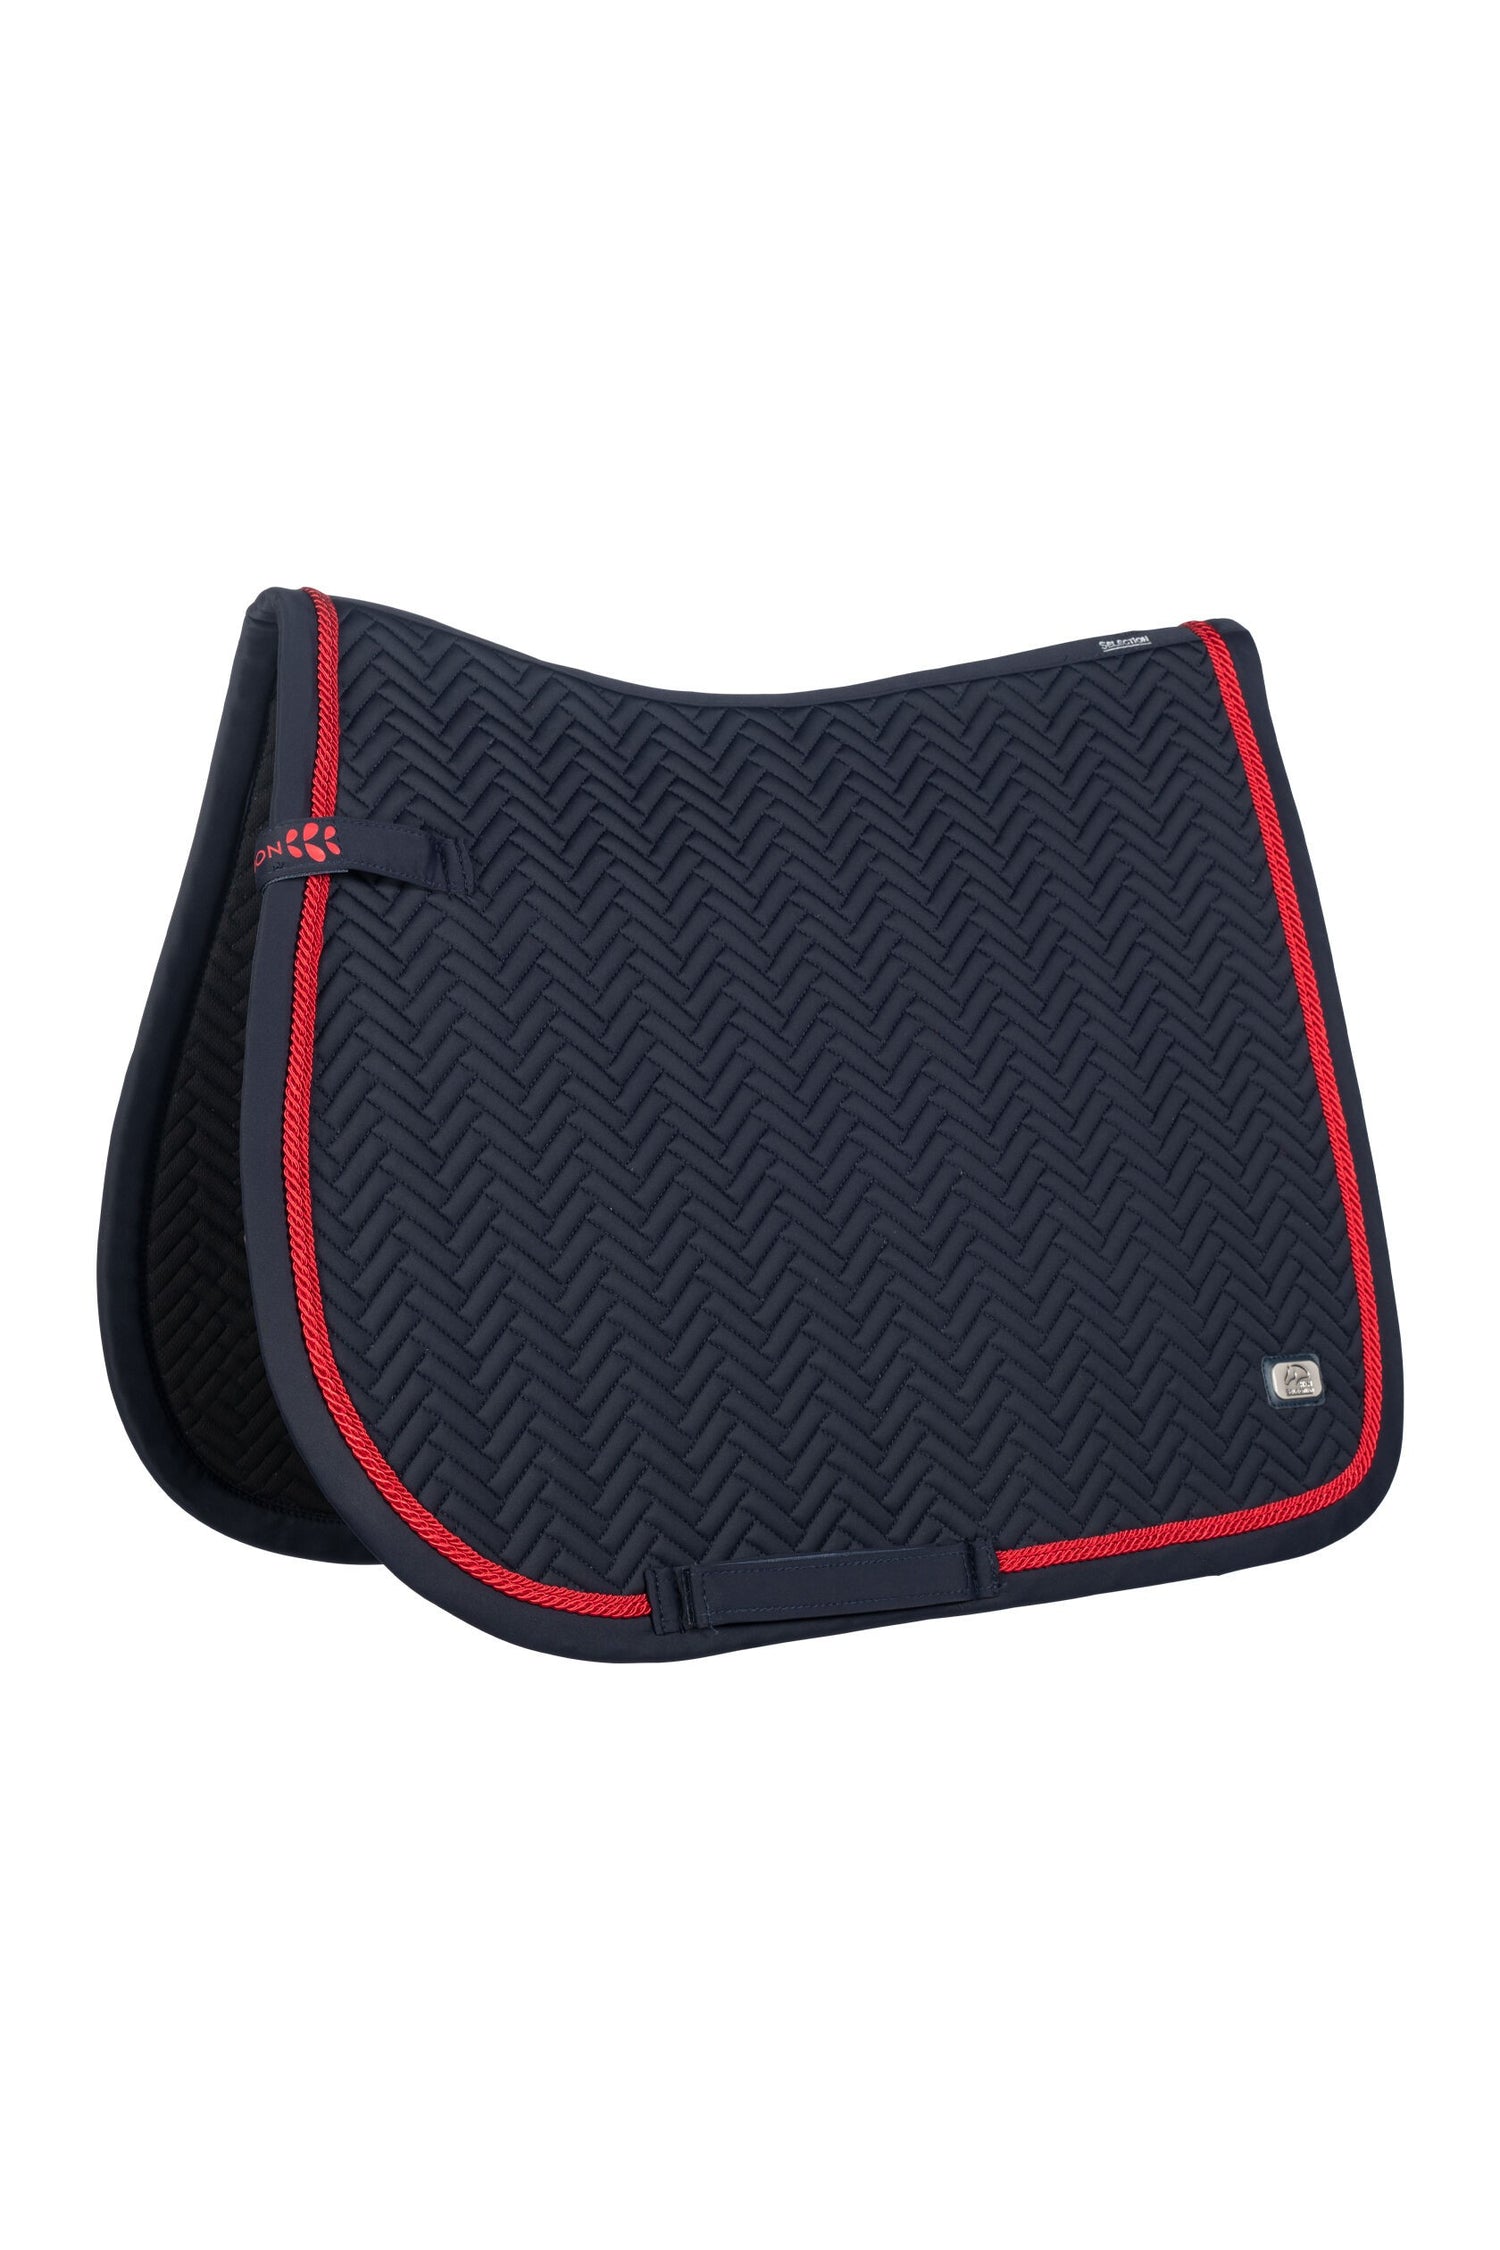 Navy saddle blanket with red edging